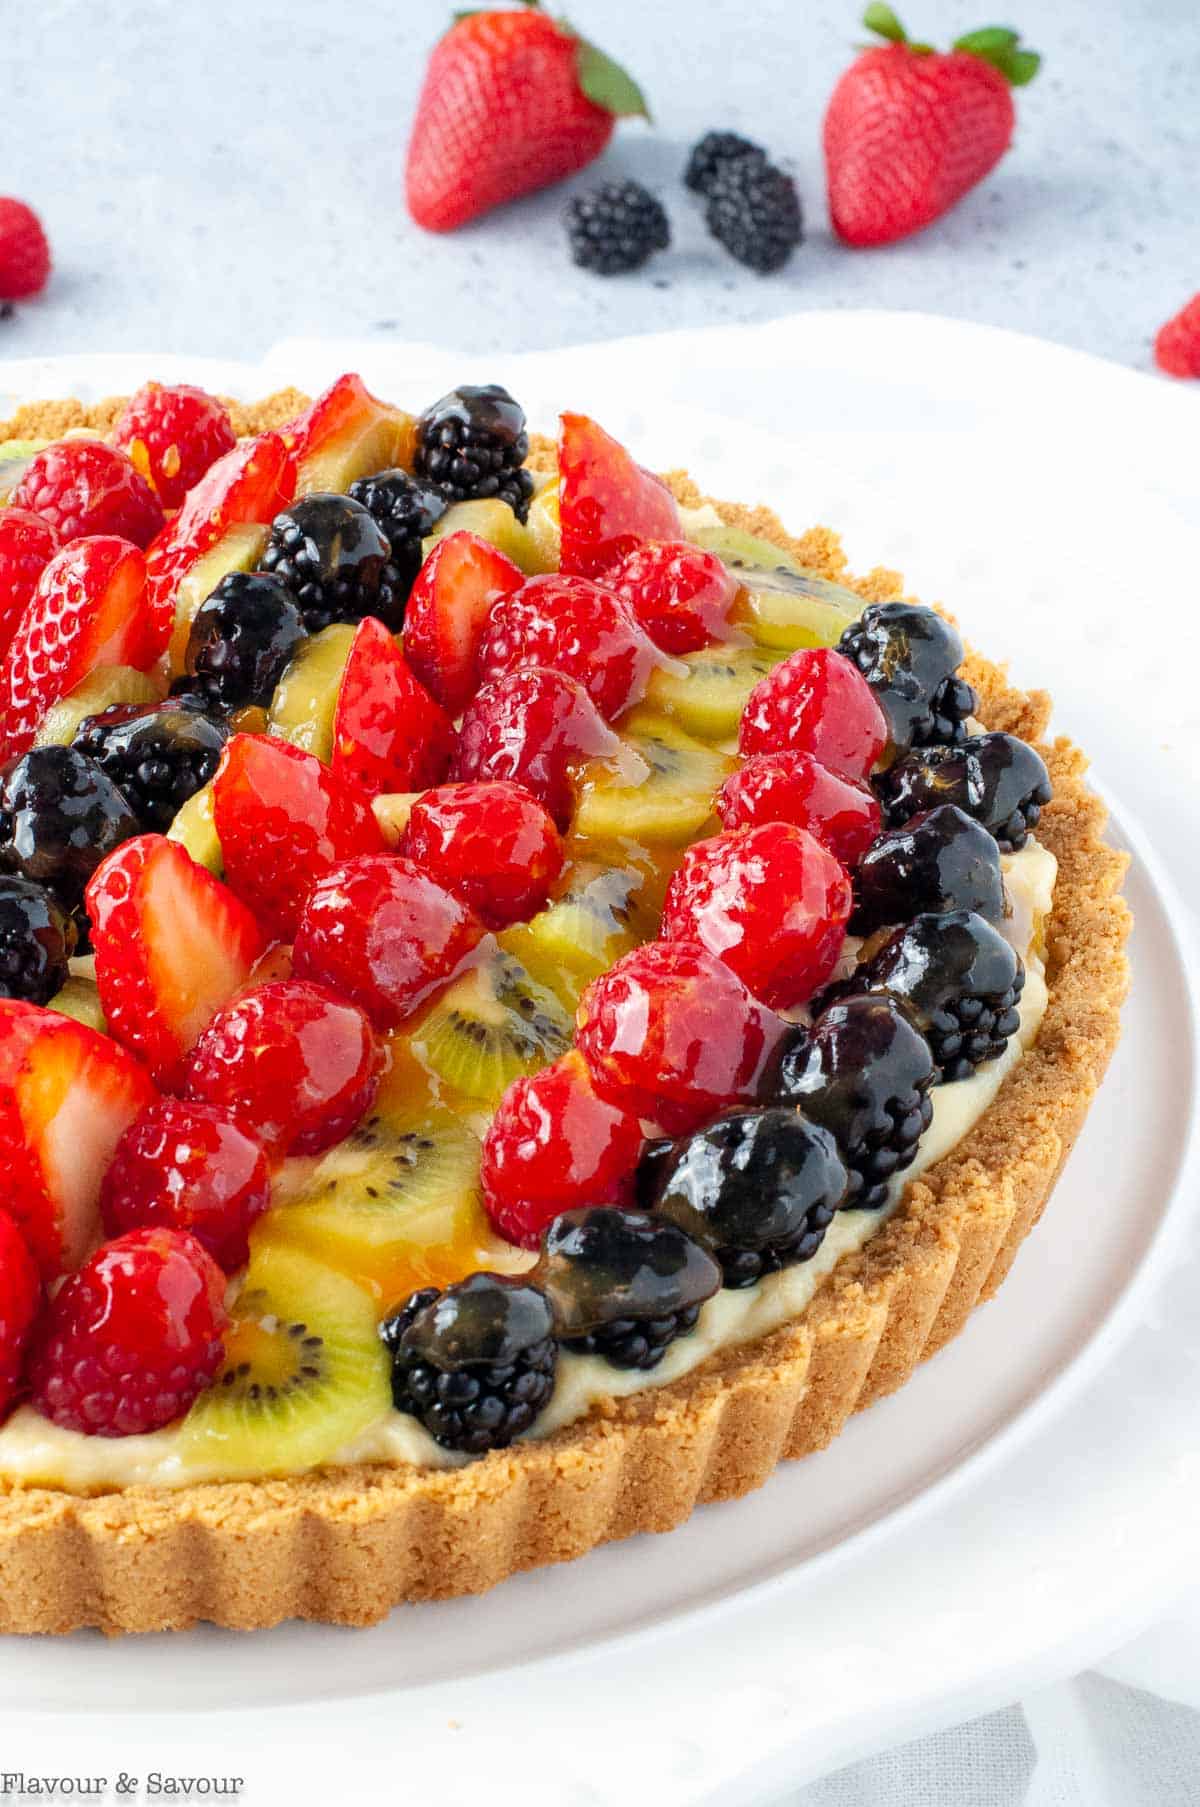 A fruit tart with vanilla pastry cream and rows of fresh berries and fruit.